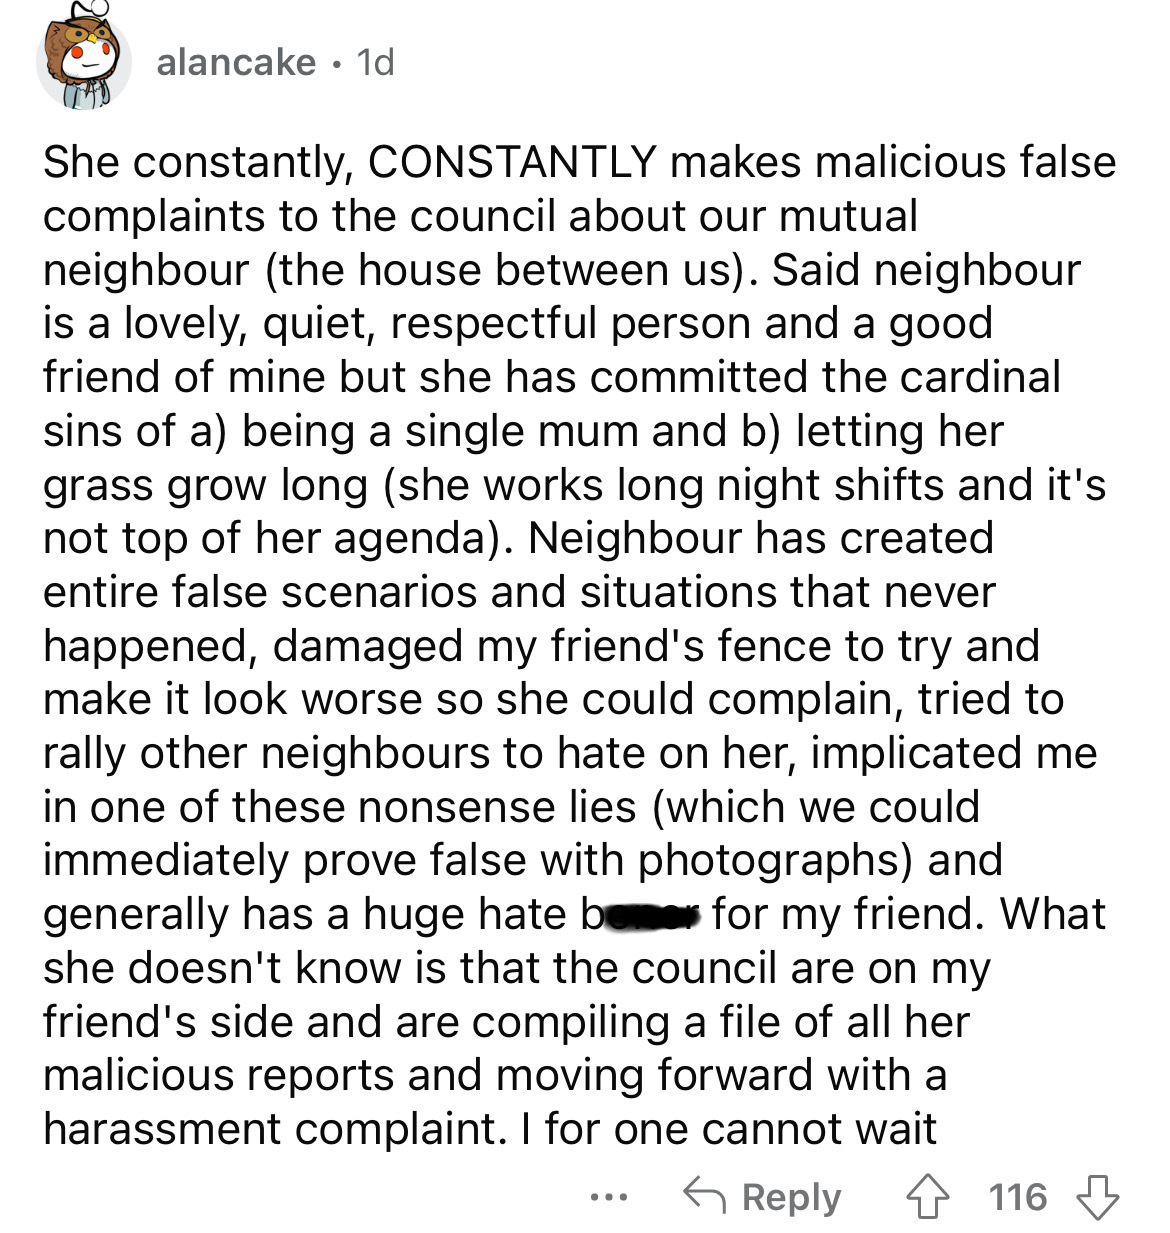 document - alancake 1d She constantly, Constantly makes malicious false complaints to the council about our mutual neighbour the house between us. Said neighbour is a lovely, quiet, respectful person and a good friend of mine but she has committed the car